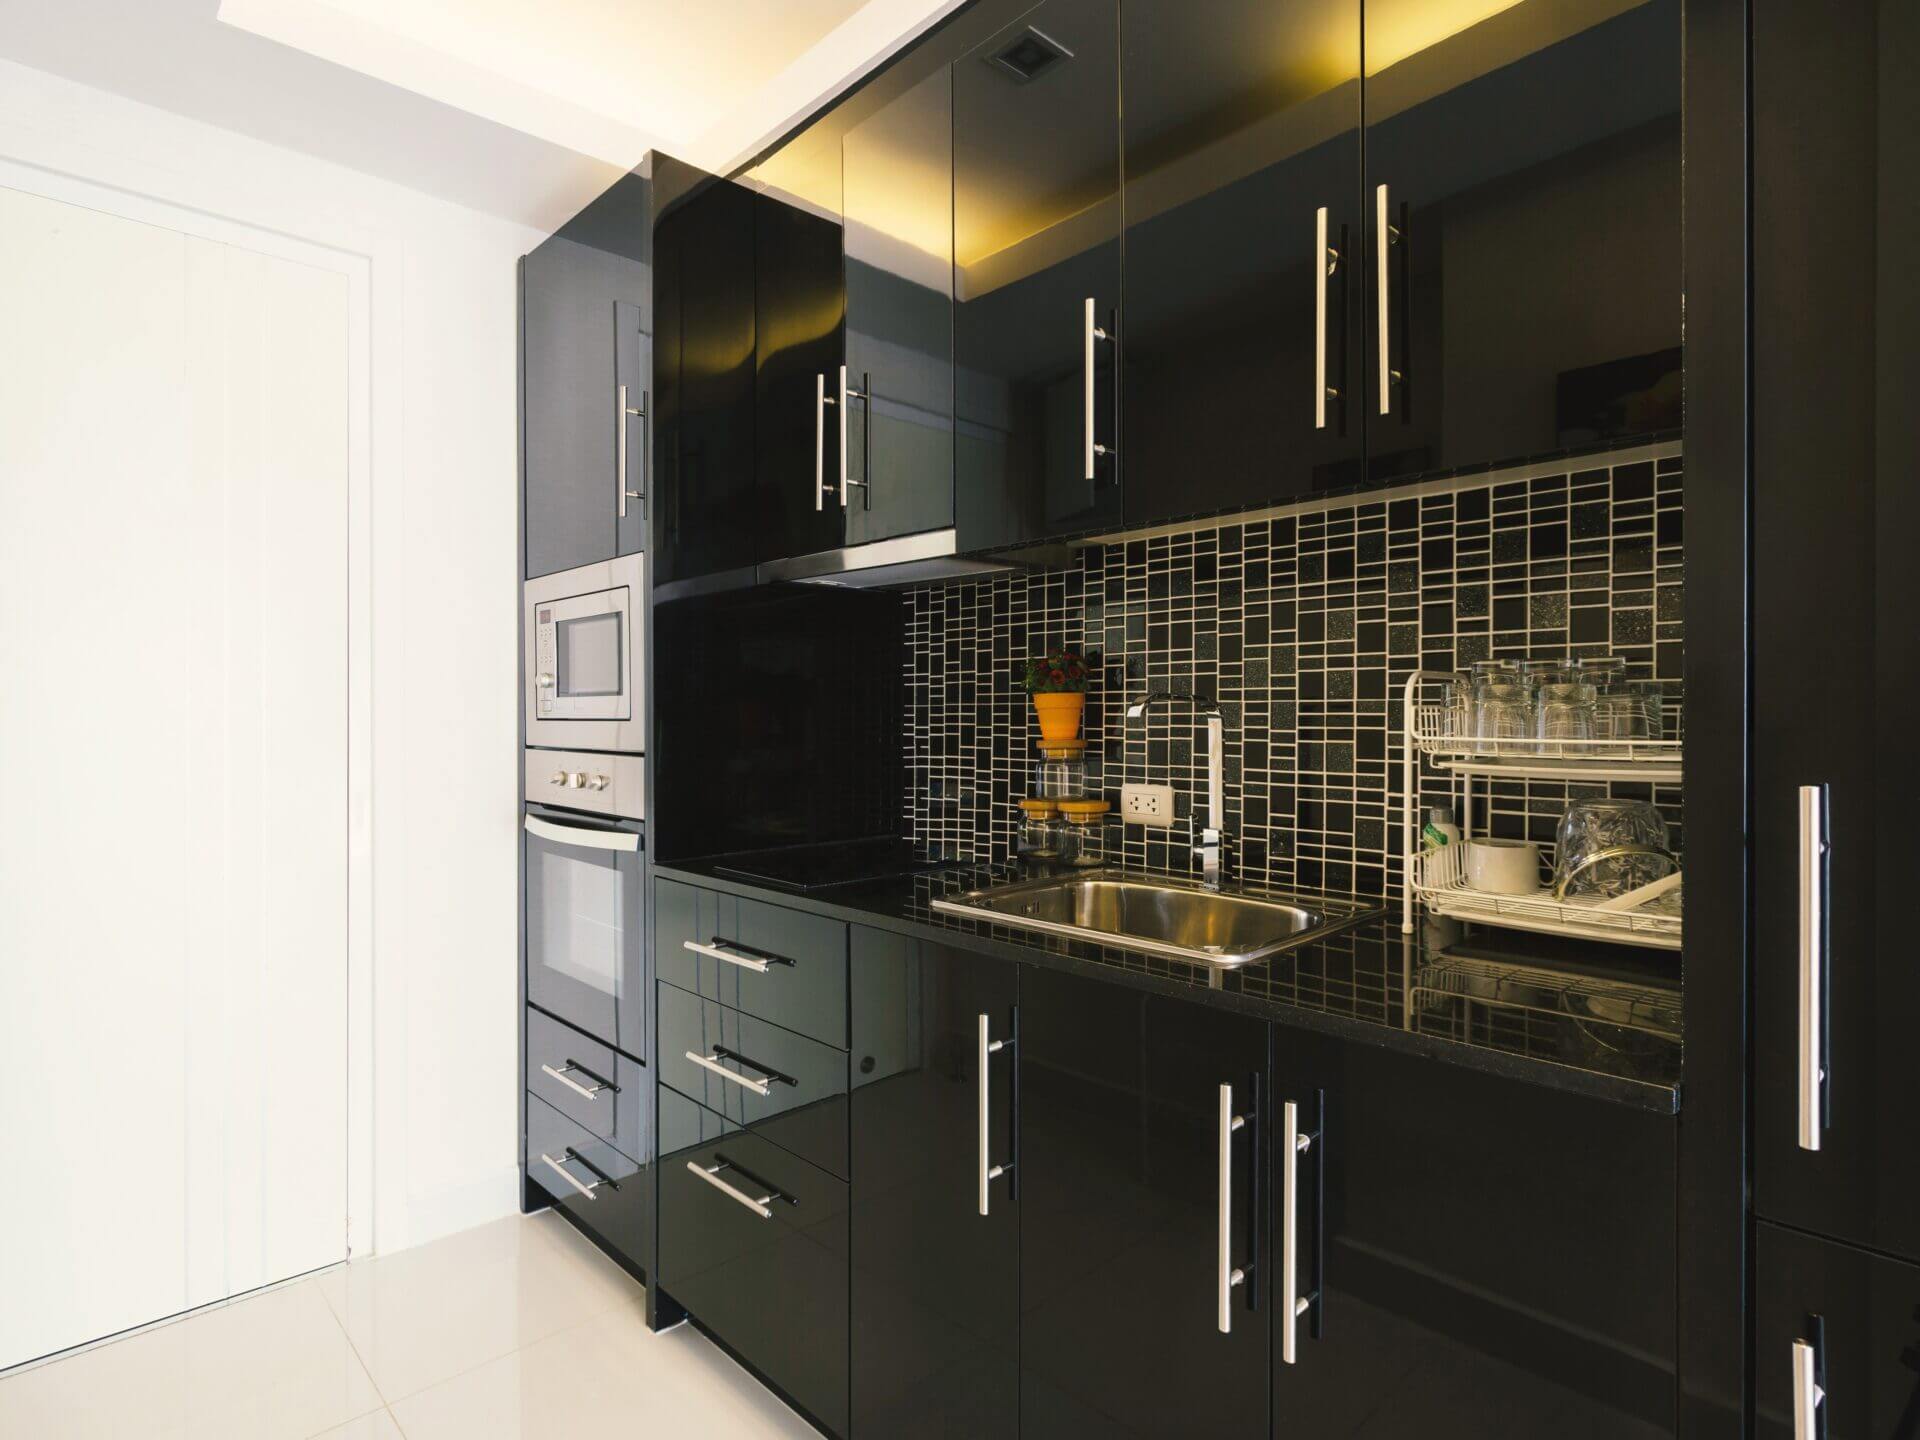 Removing a scratch from stainless steel and getting a modern style kitchen like this!